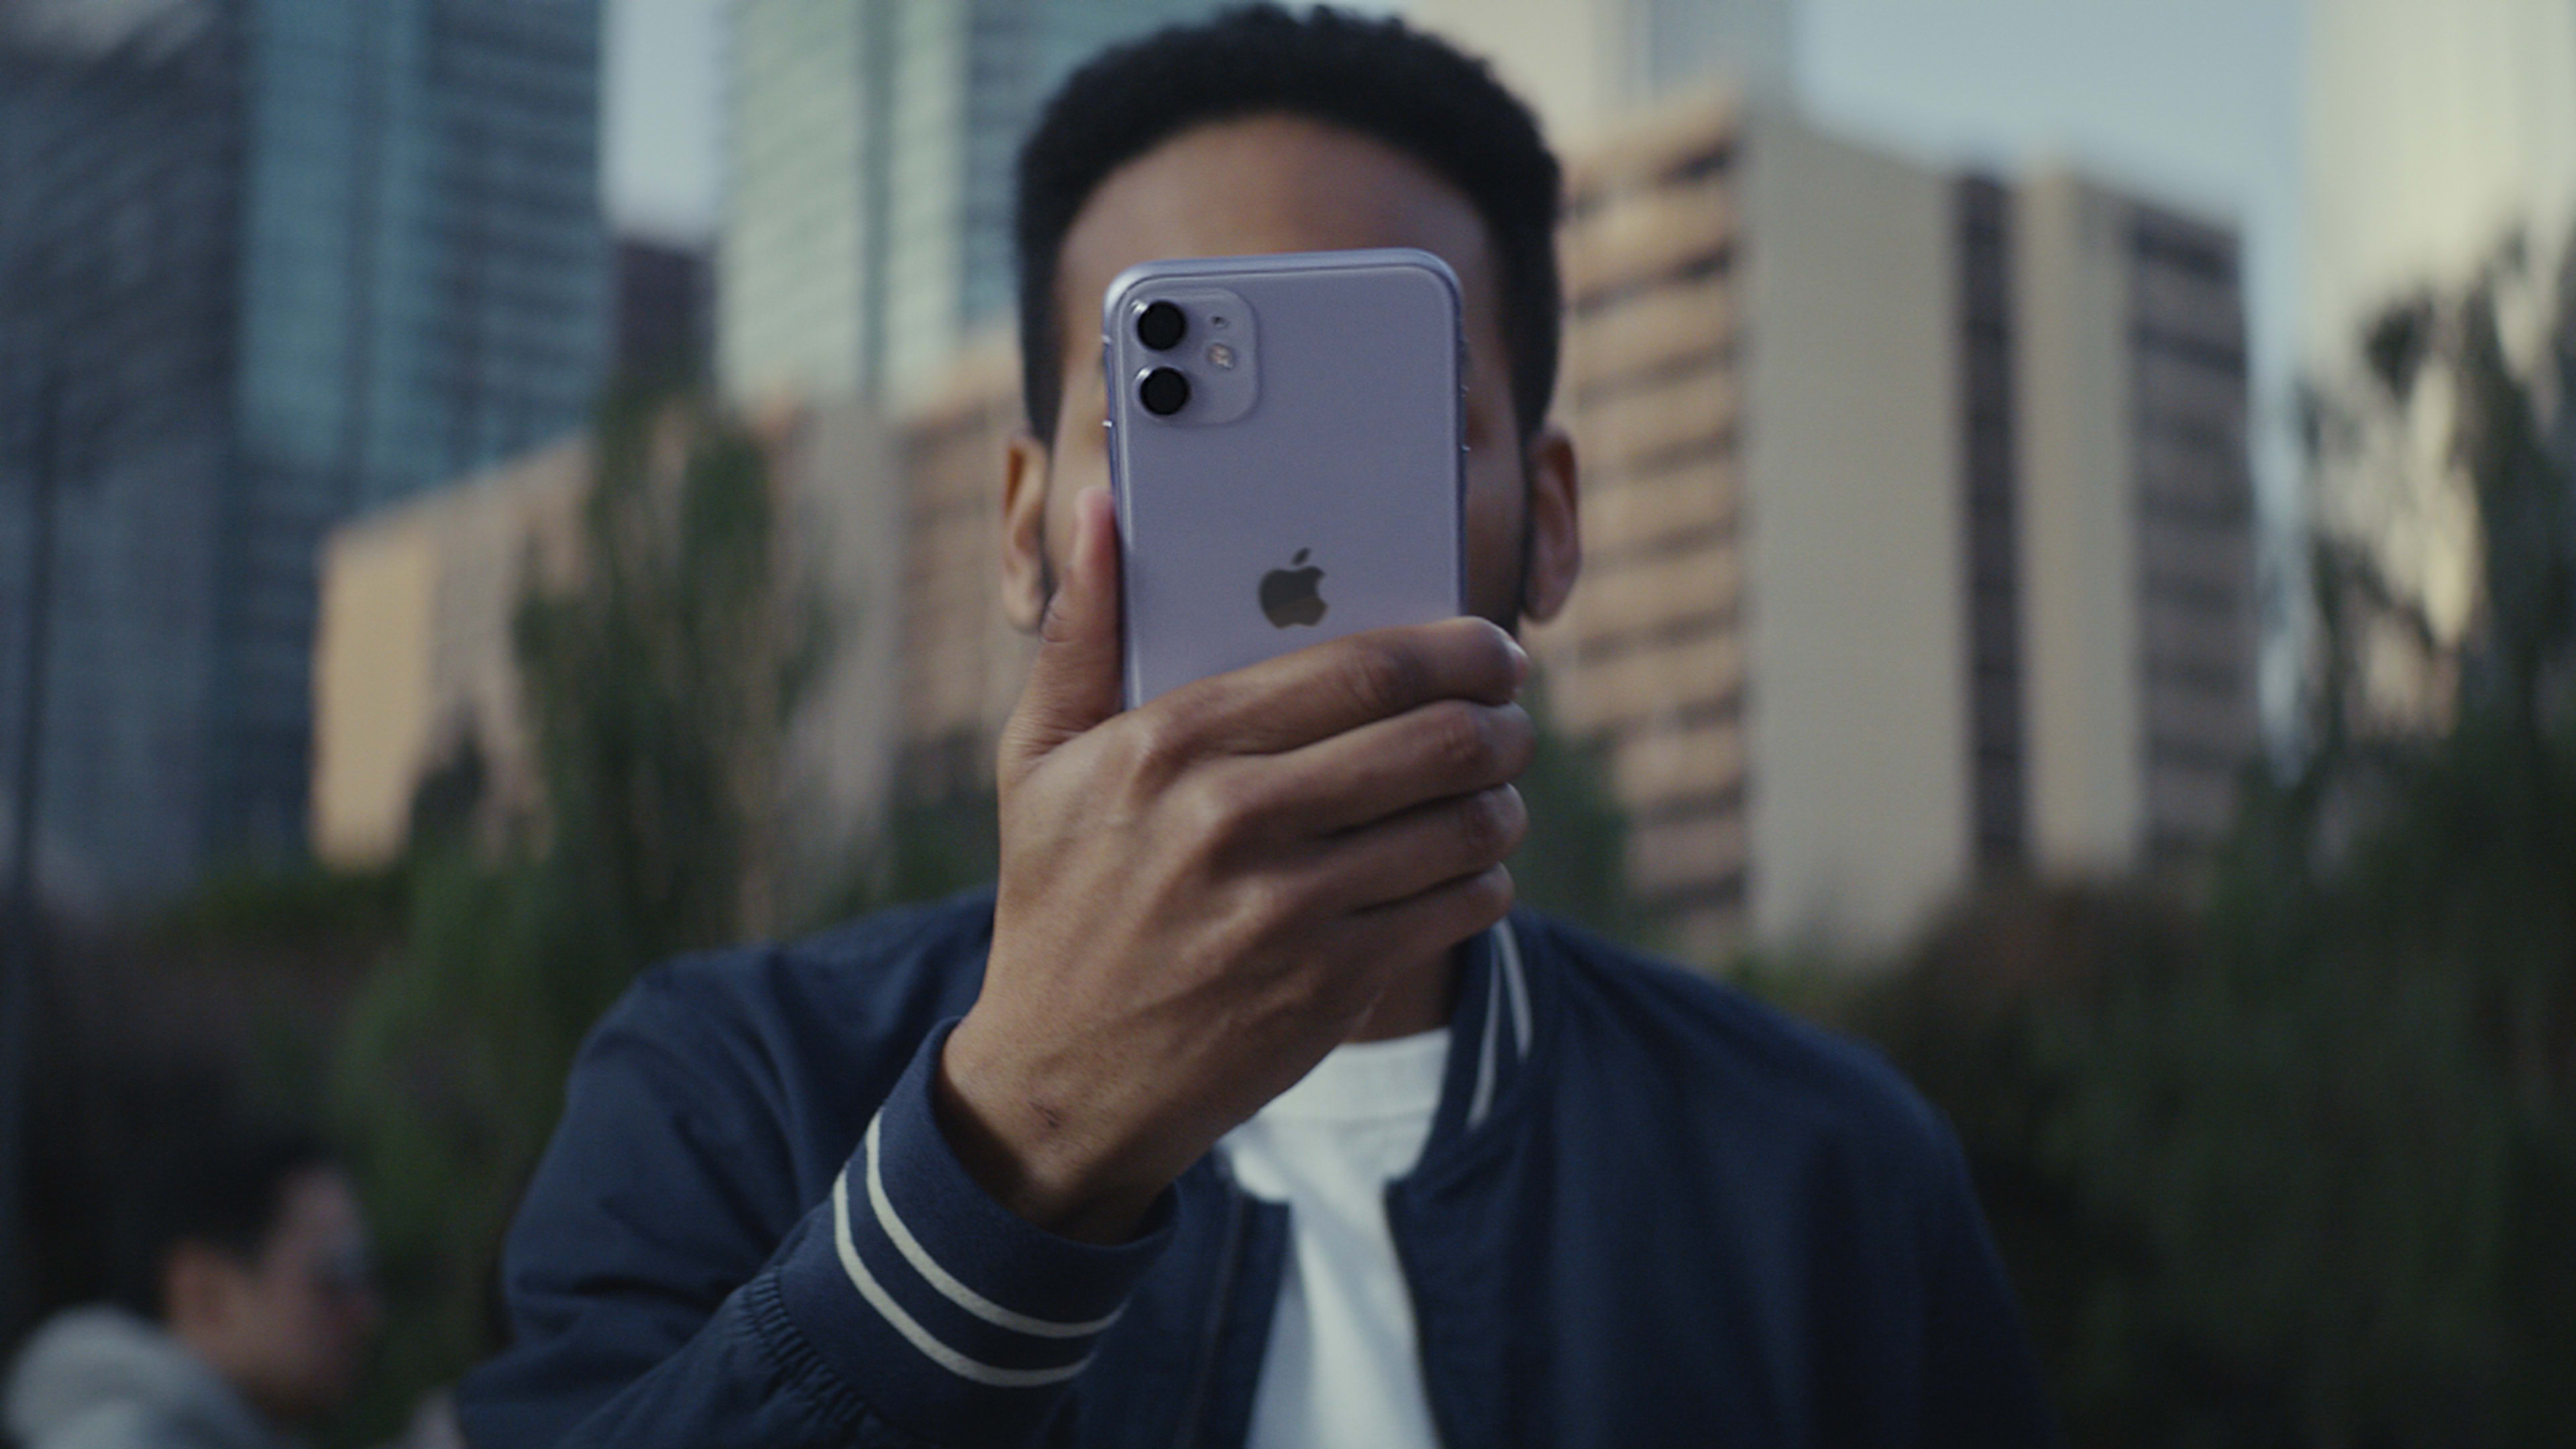 Apple’s new privacy ad has a ton of Easter eggs. Here’s what they reference